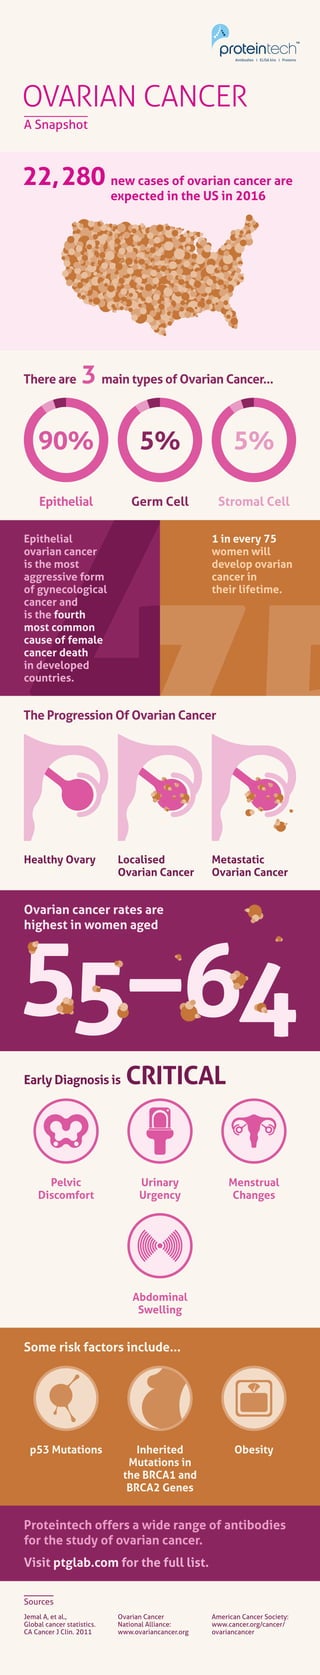 OVARIAN CANCER
A Snapshot
22,280
Early Diagnosis is CRITICAL
There are
The Progression Of Ovarian Cancer
Epithelial Germ Cell Stromal Cell
new cases of ovarian cancer are
expected in the US in 2016
90%
3
5% 5%
main types of Ovarian Cancer...
Epithelial
ovarian cancer
is the most
aggressive form
of gynecological
cancer and
is the fourth
most common
cause of female
cancer death
in developed
countries.
1 in every 751 in every 75
women will
develop ovarian
cancer in
their lifetime.
Healthy Ovary
Pelvic
Discomfort
Inherited
Mutations in
the BRCA1 and
BRCA2 Genes
Obesityp53 Mutations
Urinary
Urgency
Abdominal
Swelling
Menstrual
Changes
Localised
Ovarian Cancer
Metastatic
Ovarian Cancer
Ovarian cancer rates are
highest in women aged
Proteintech offers a wide range of antibodies
for the study of ovarian cancer.
Visit ptglab.com for the full list.
Sources
Some risk factors include...
Jemal A, et al.,
Global cancer statistics.
CA Cancer J Clin. 2011
Ovarian Cancer
National Alliance:
www.ovariancancer.org
American Cancer Society:
www.cancer.org/cancer/
ovariancancer
 